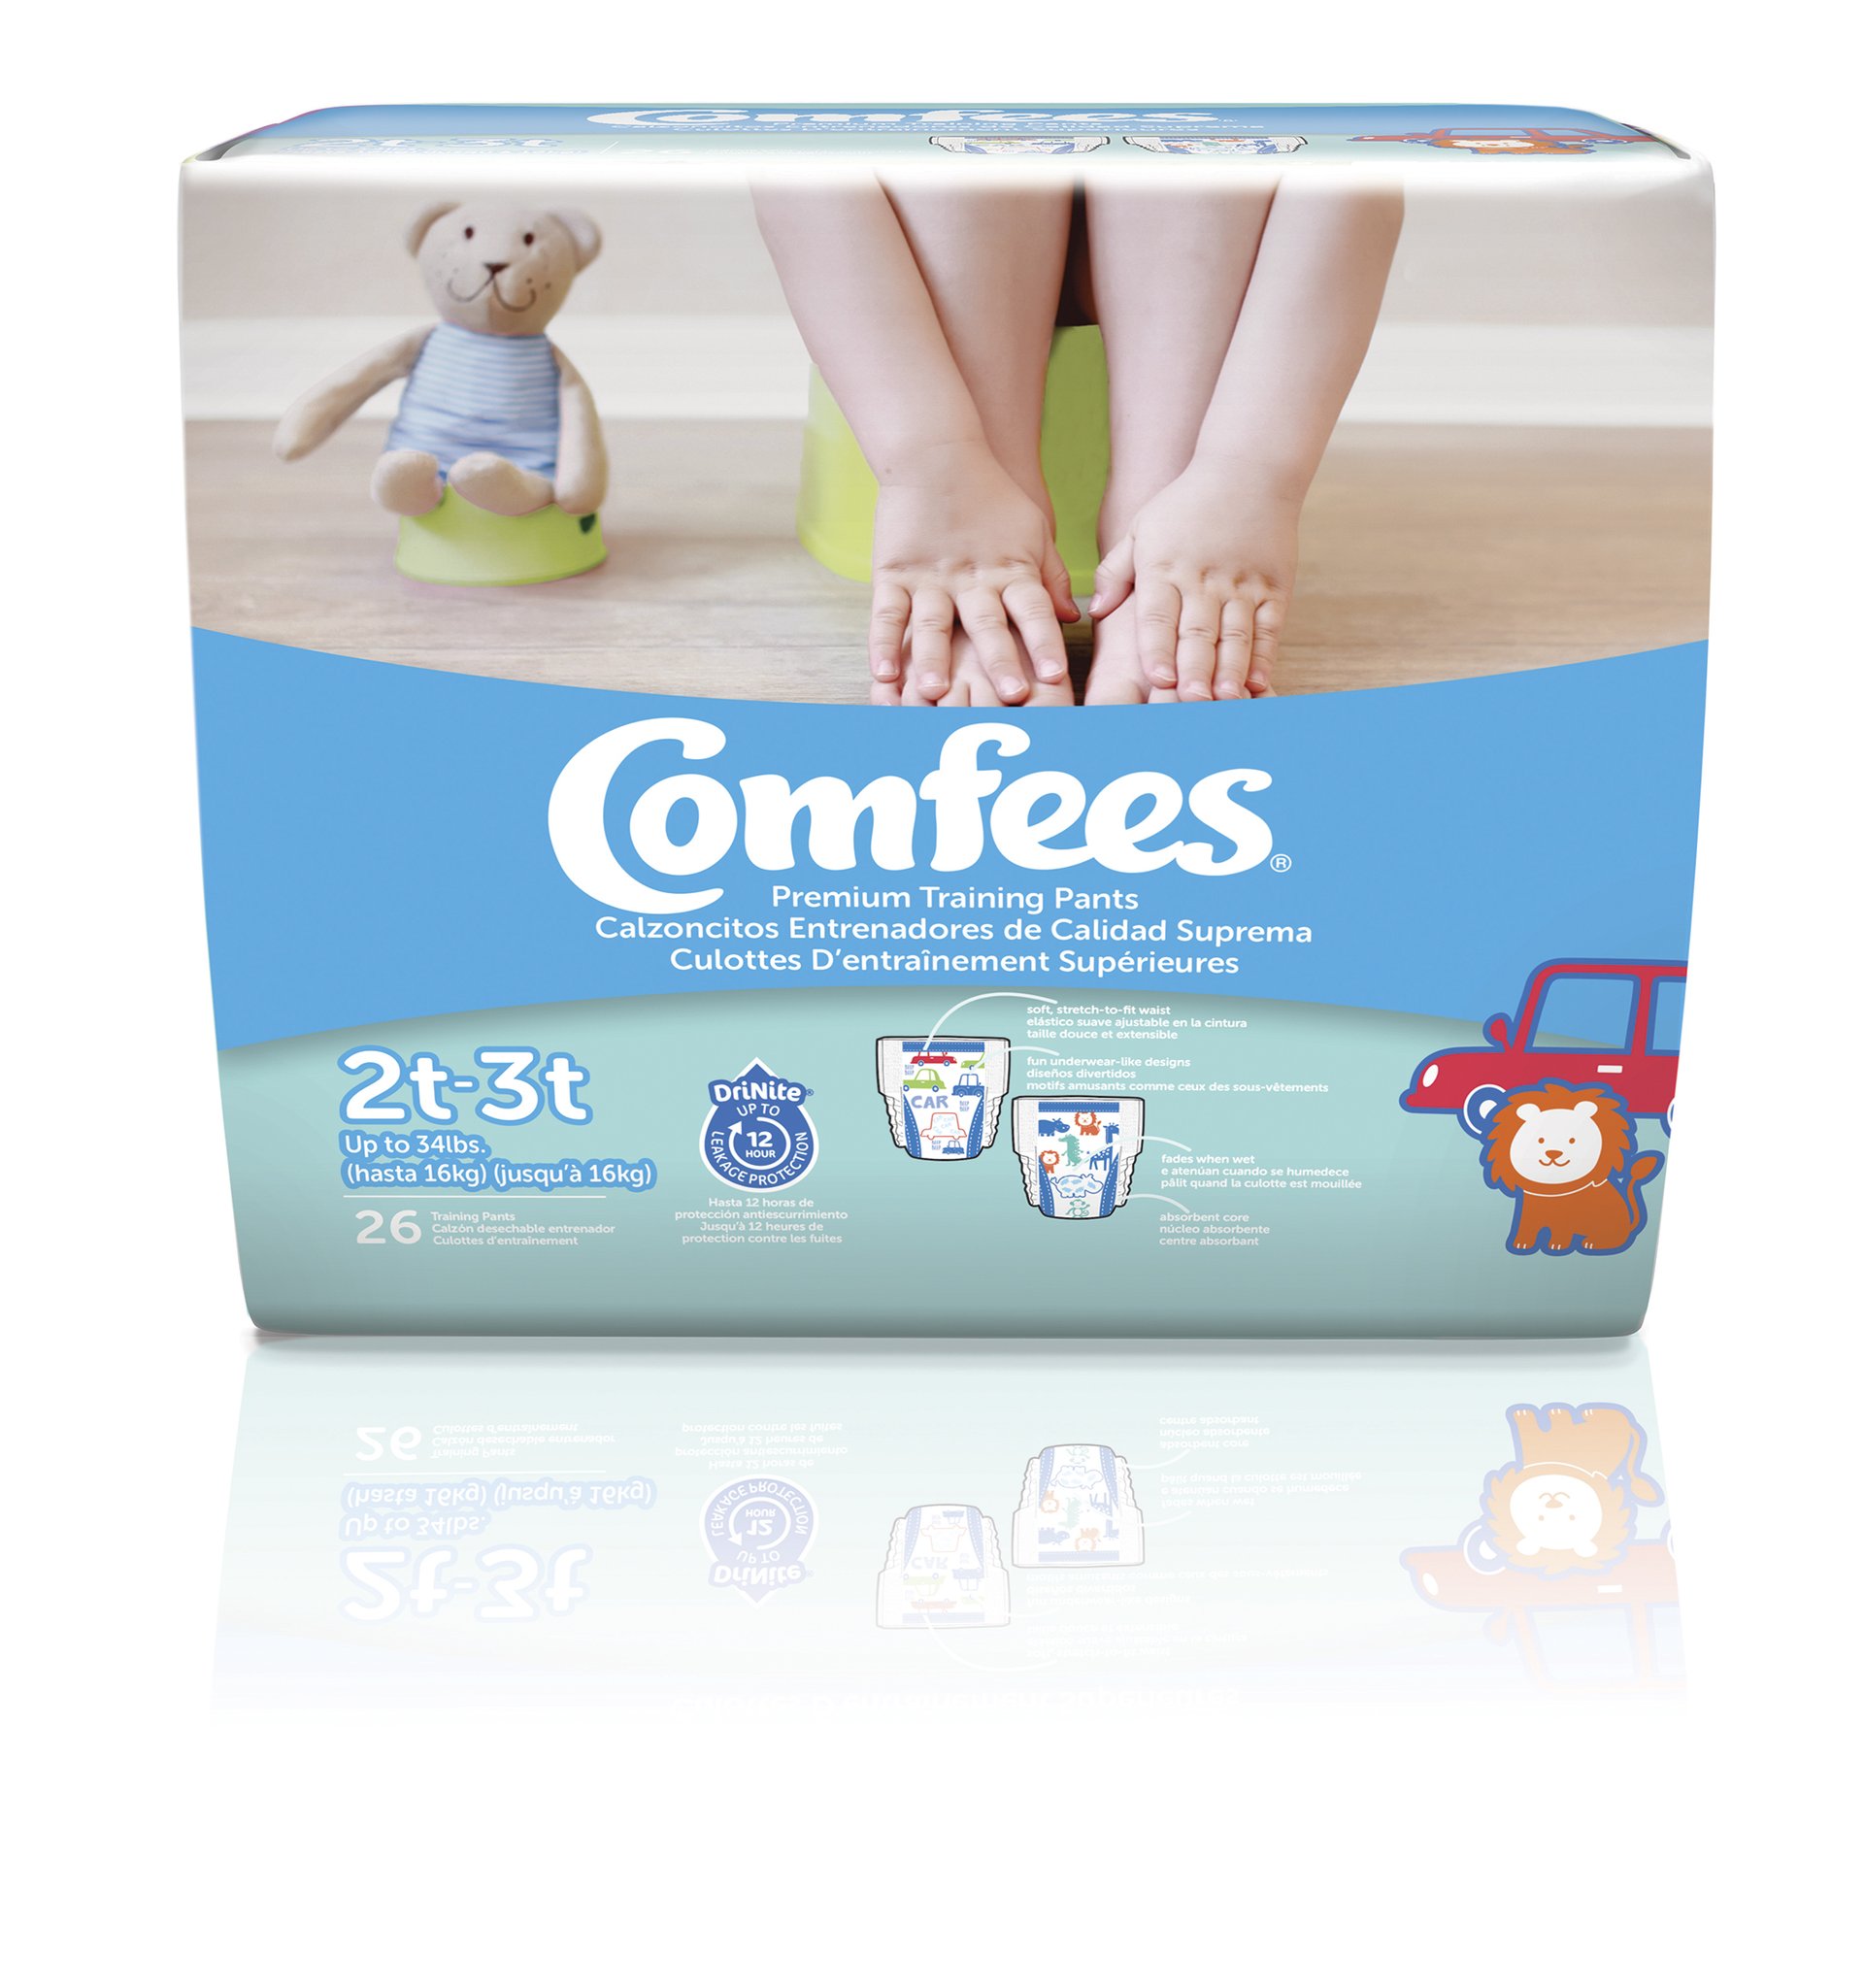 Buy Potty Training Diapers Online, Comfees Training Pants - Size 2T-3T-Boys